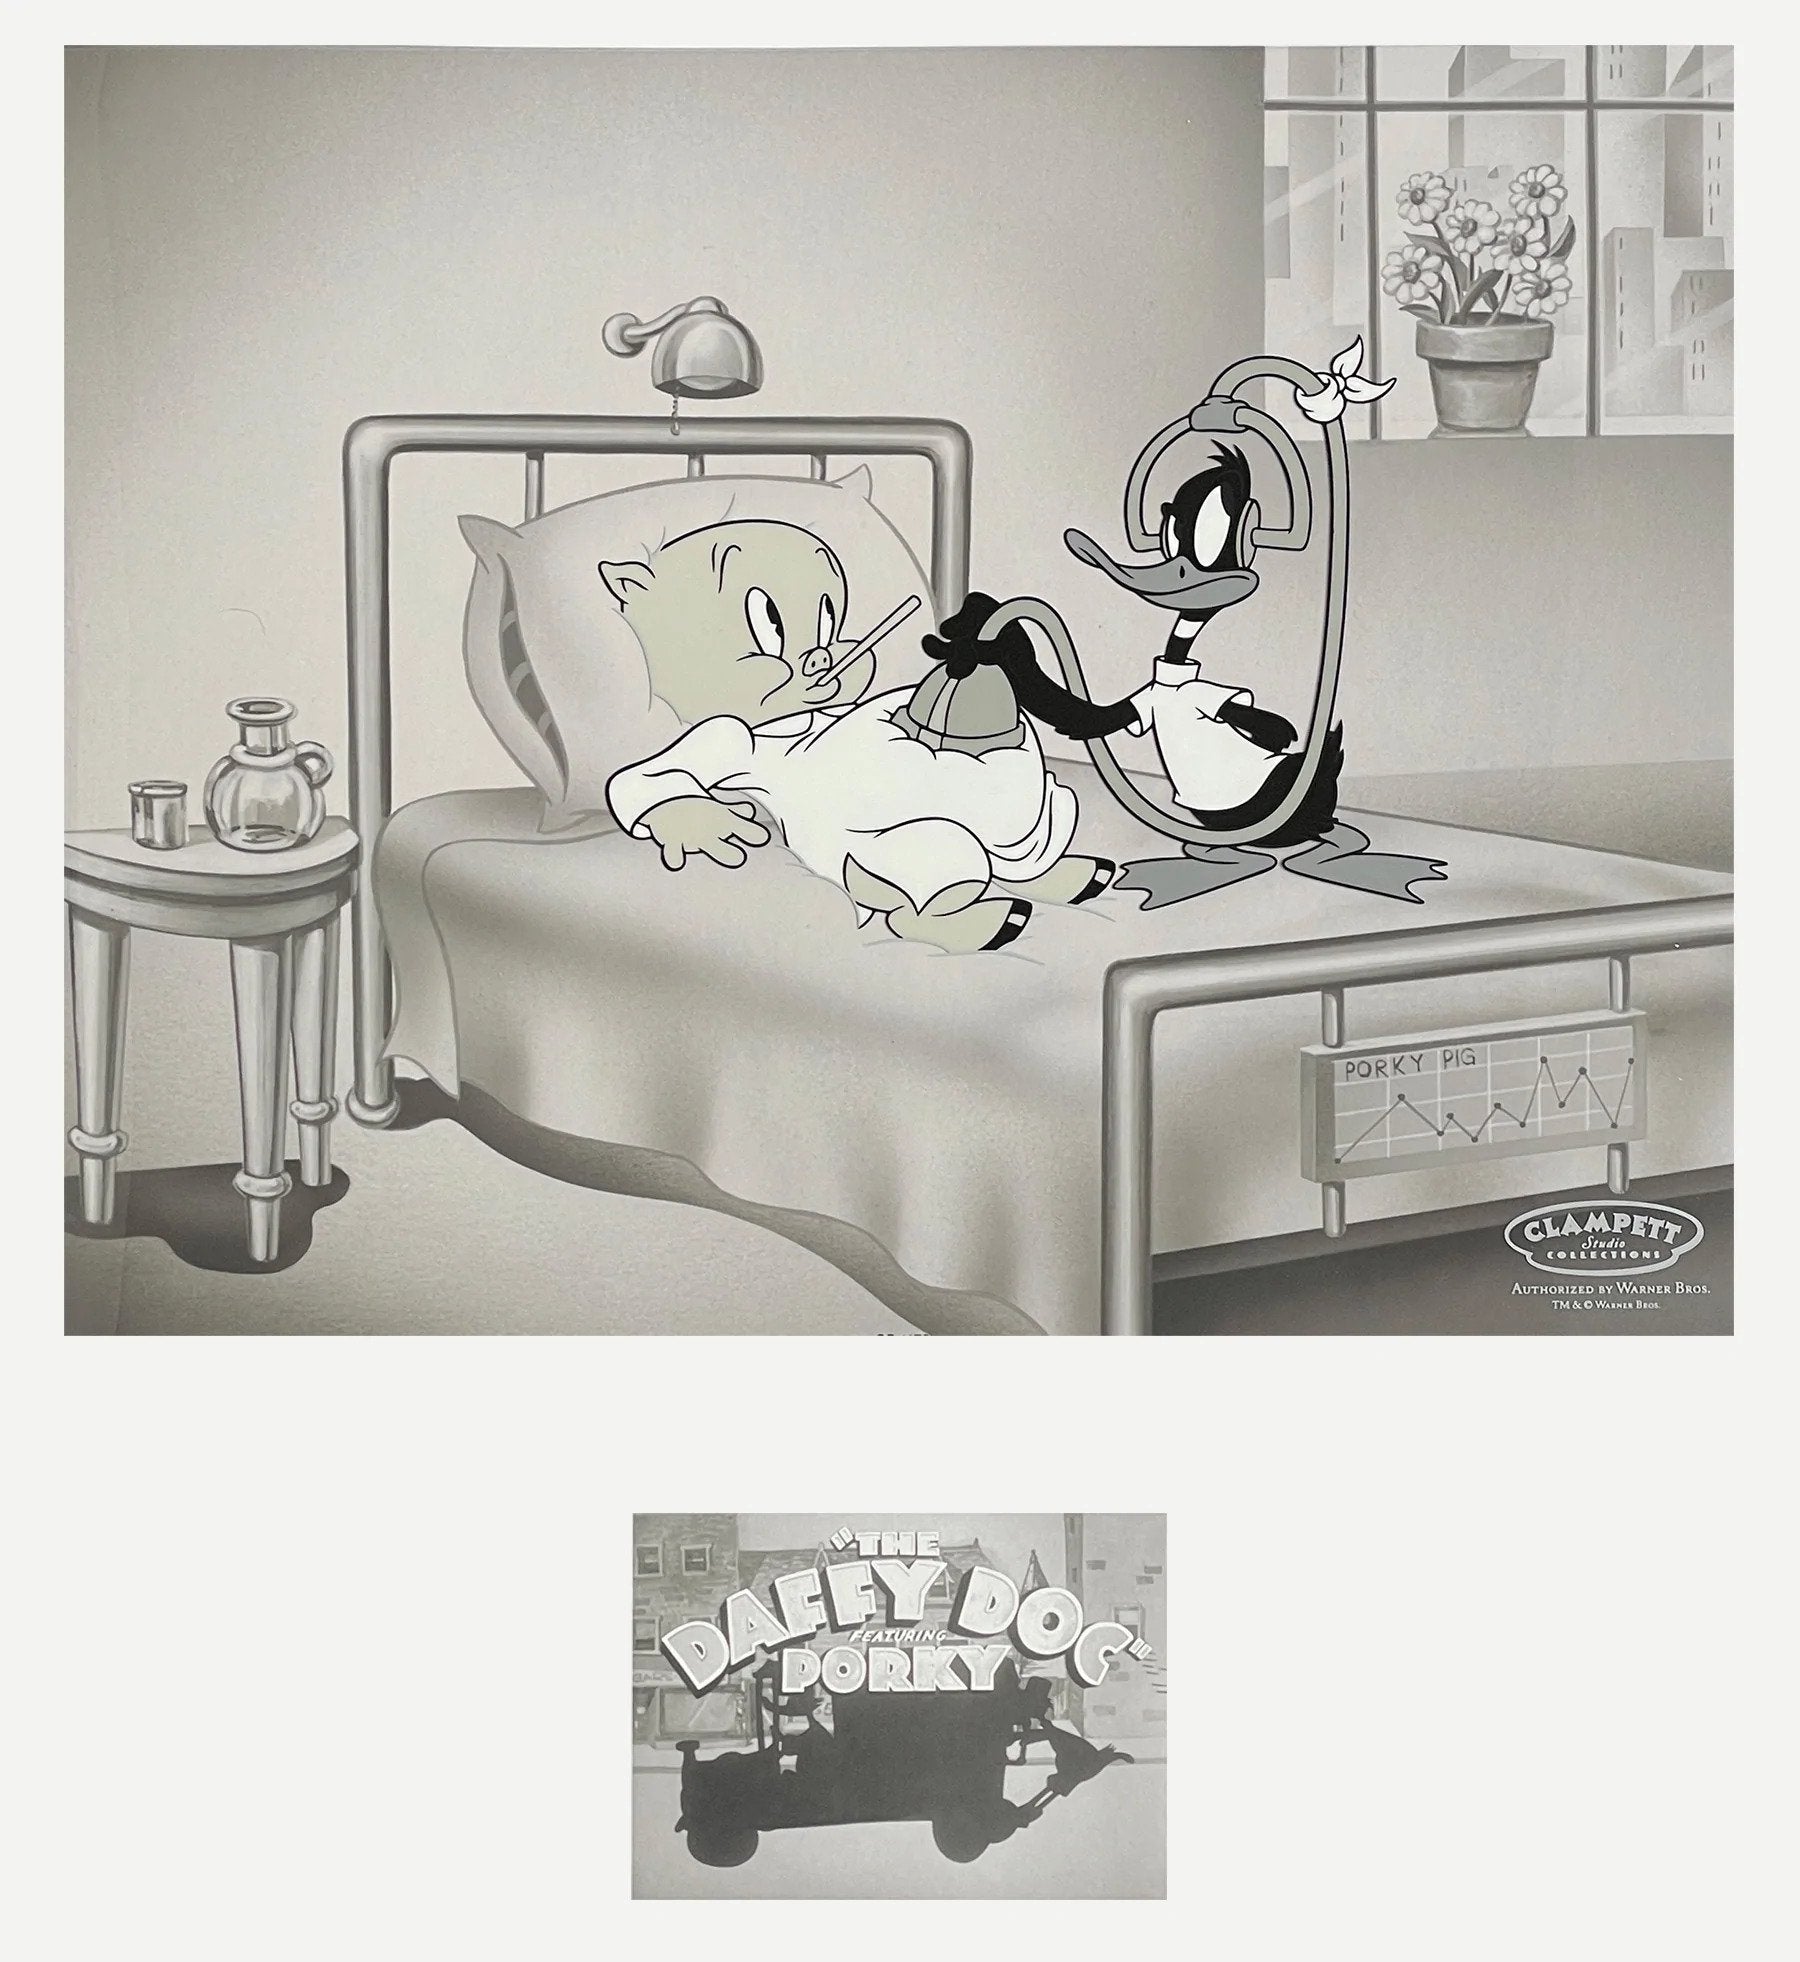 “Daffy Doc,” in 1938 proved to be one of the most hilarious and memorable meetings of both Pig and Duck, as Daffy’s ultimate mission is to open and perform surgery on Daffy.